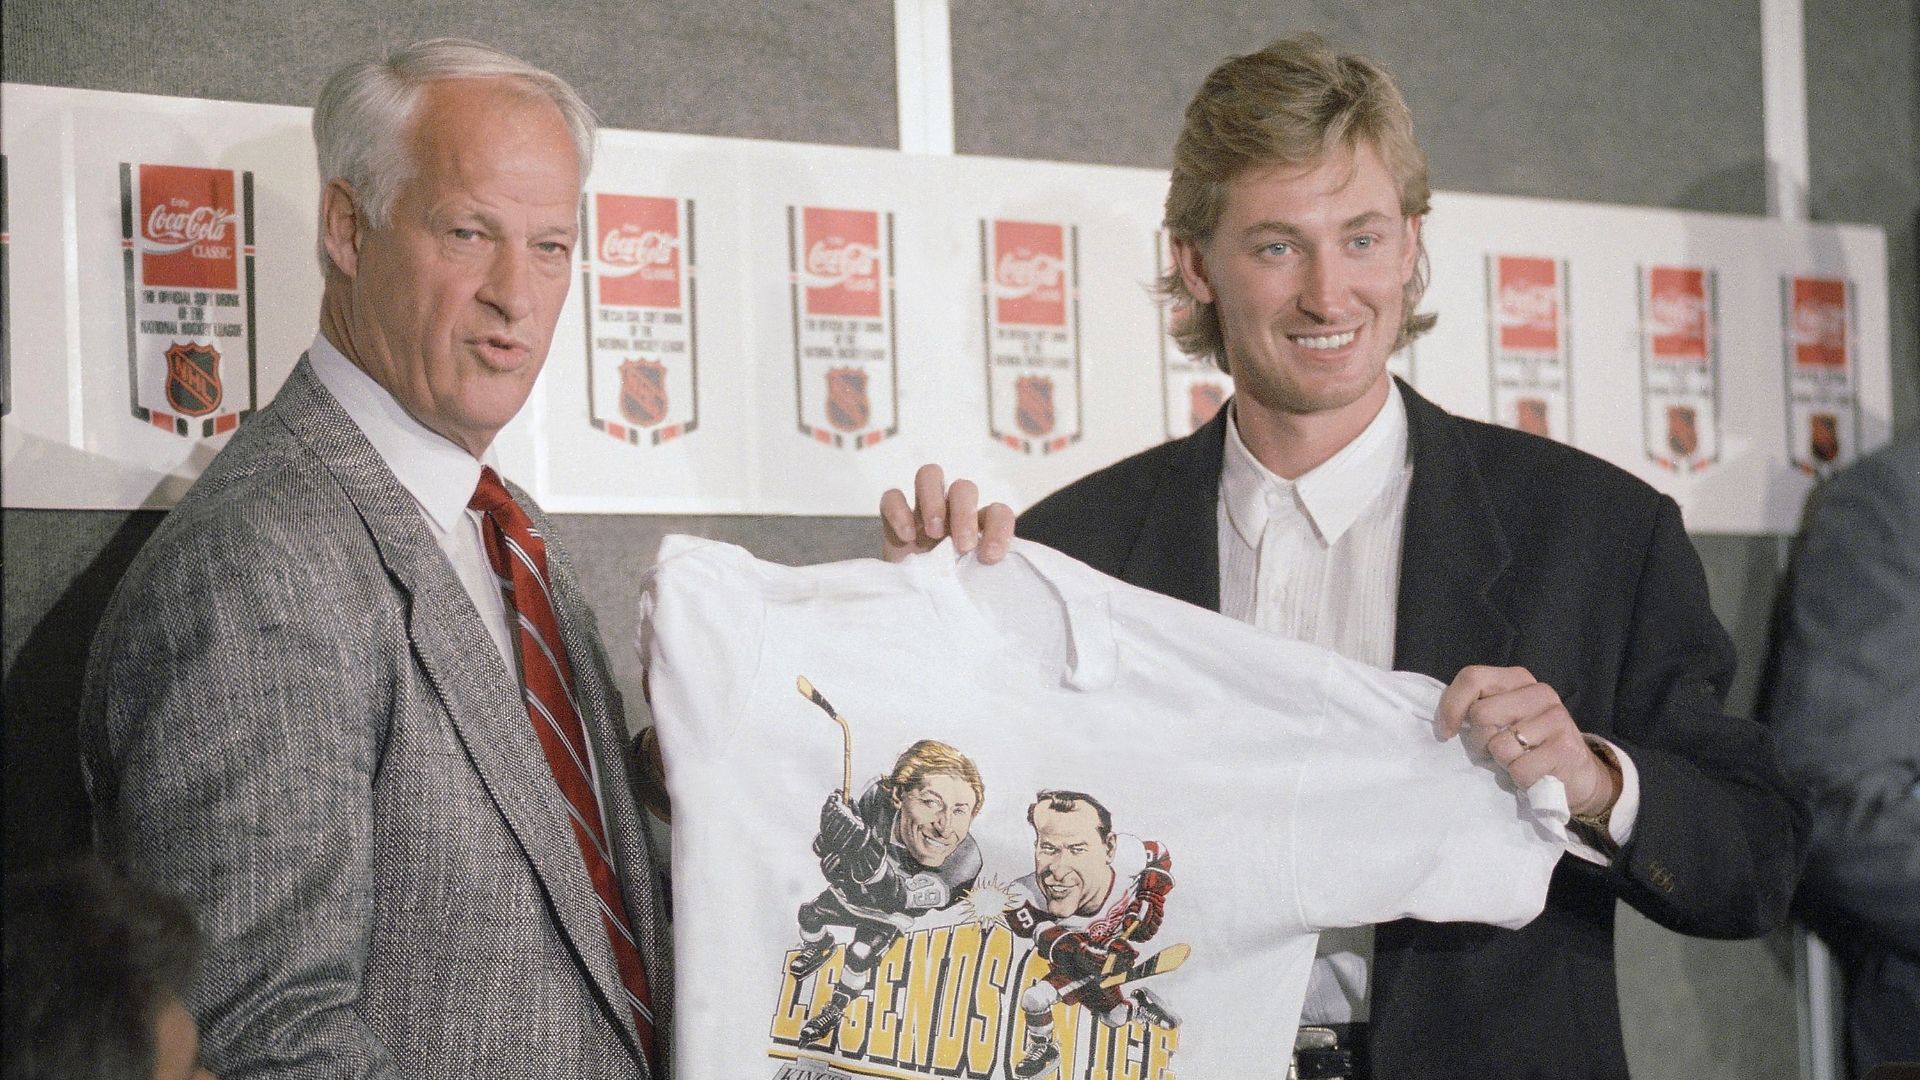 Gretzky: I was one of the lucky few to meet my idol